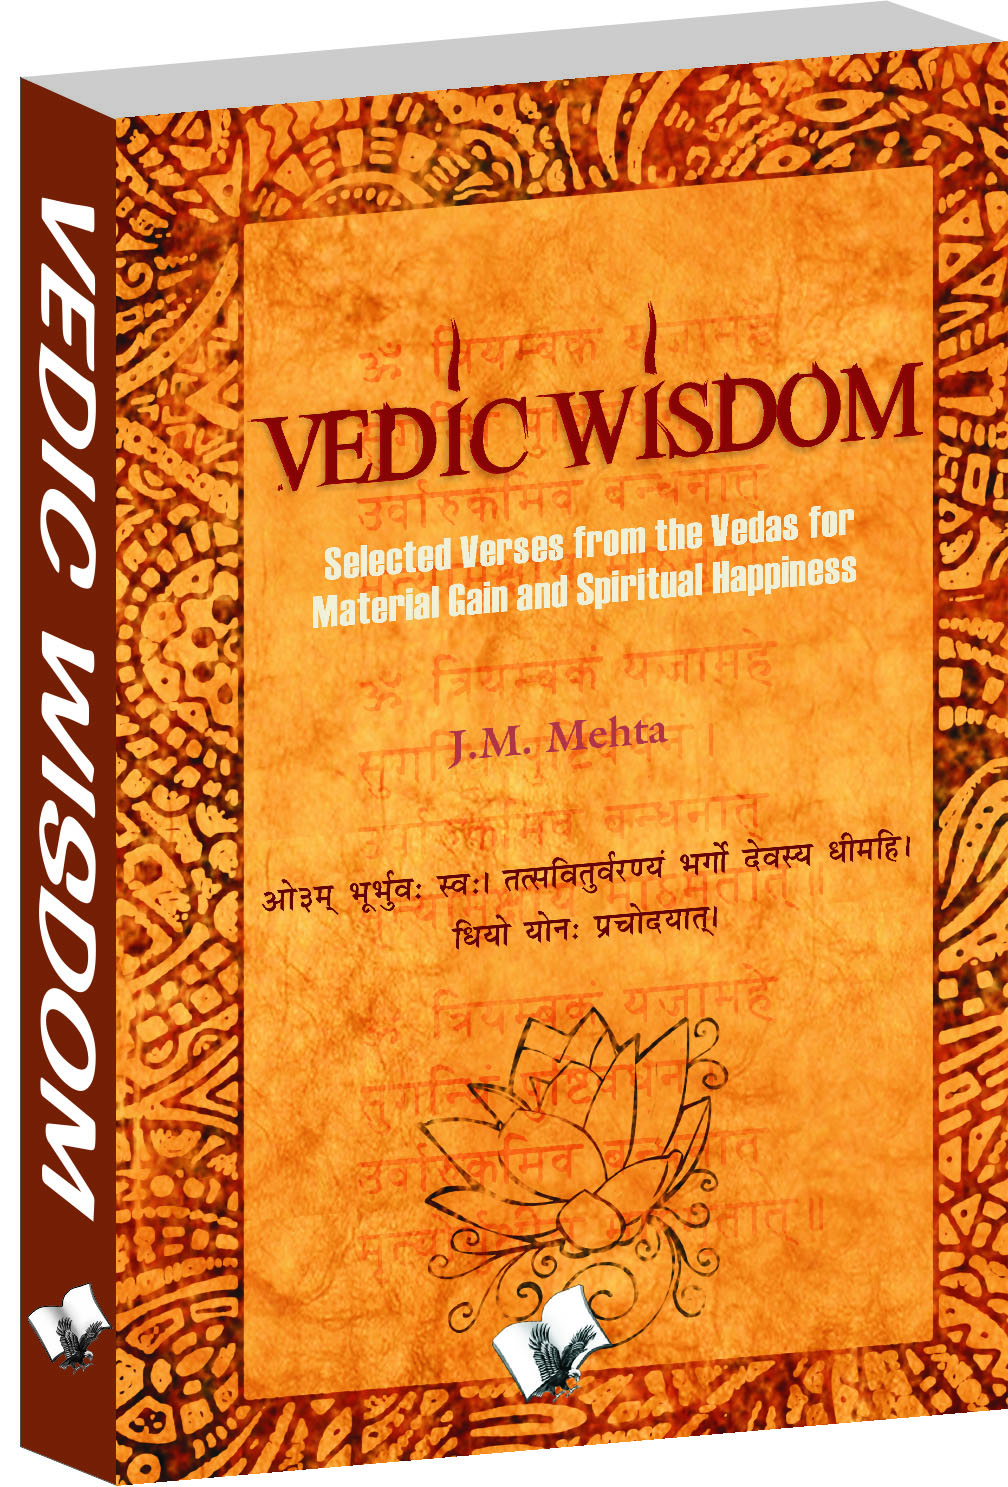 Vedic Wisdom-Selected verses from the vedas for material gain and happiness 